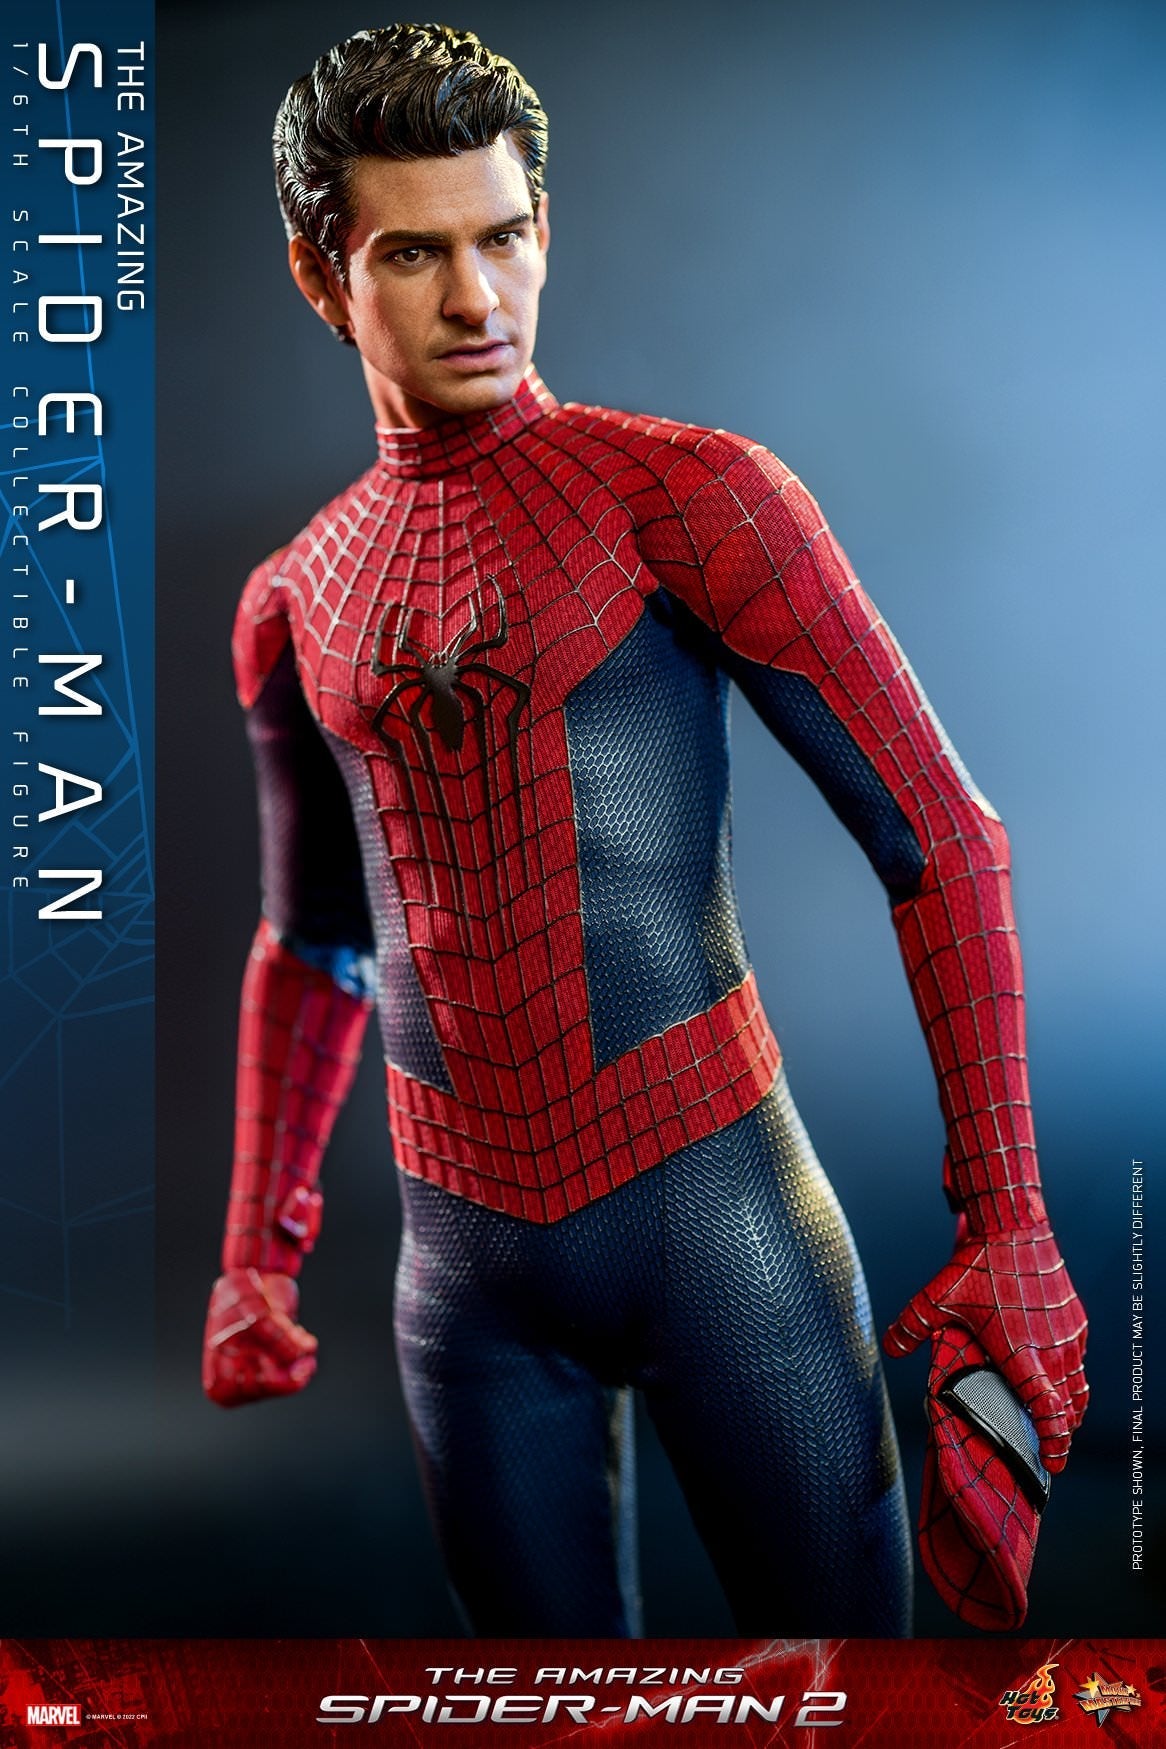 The Amazing Spider-Man: Andrew Garfield: The Amazing Spider-Man 2: Marvel Hot Toys